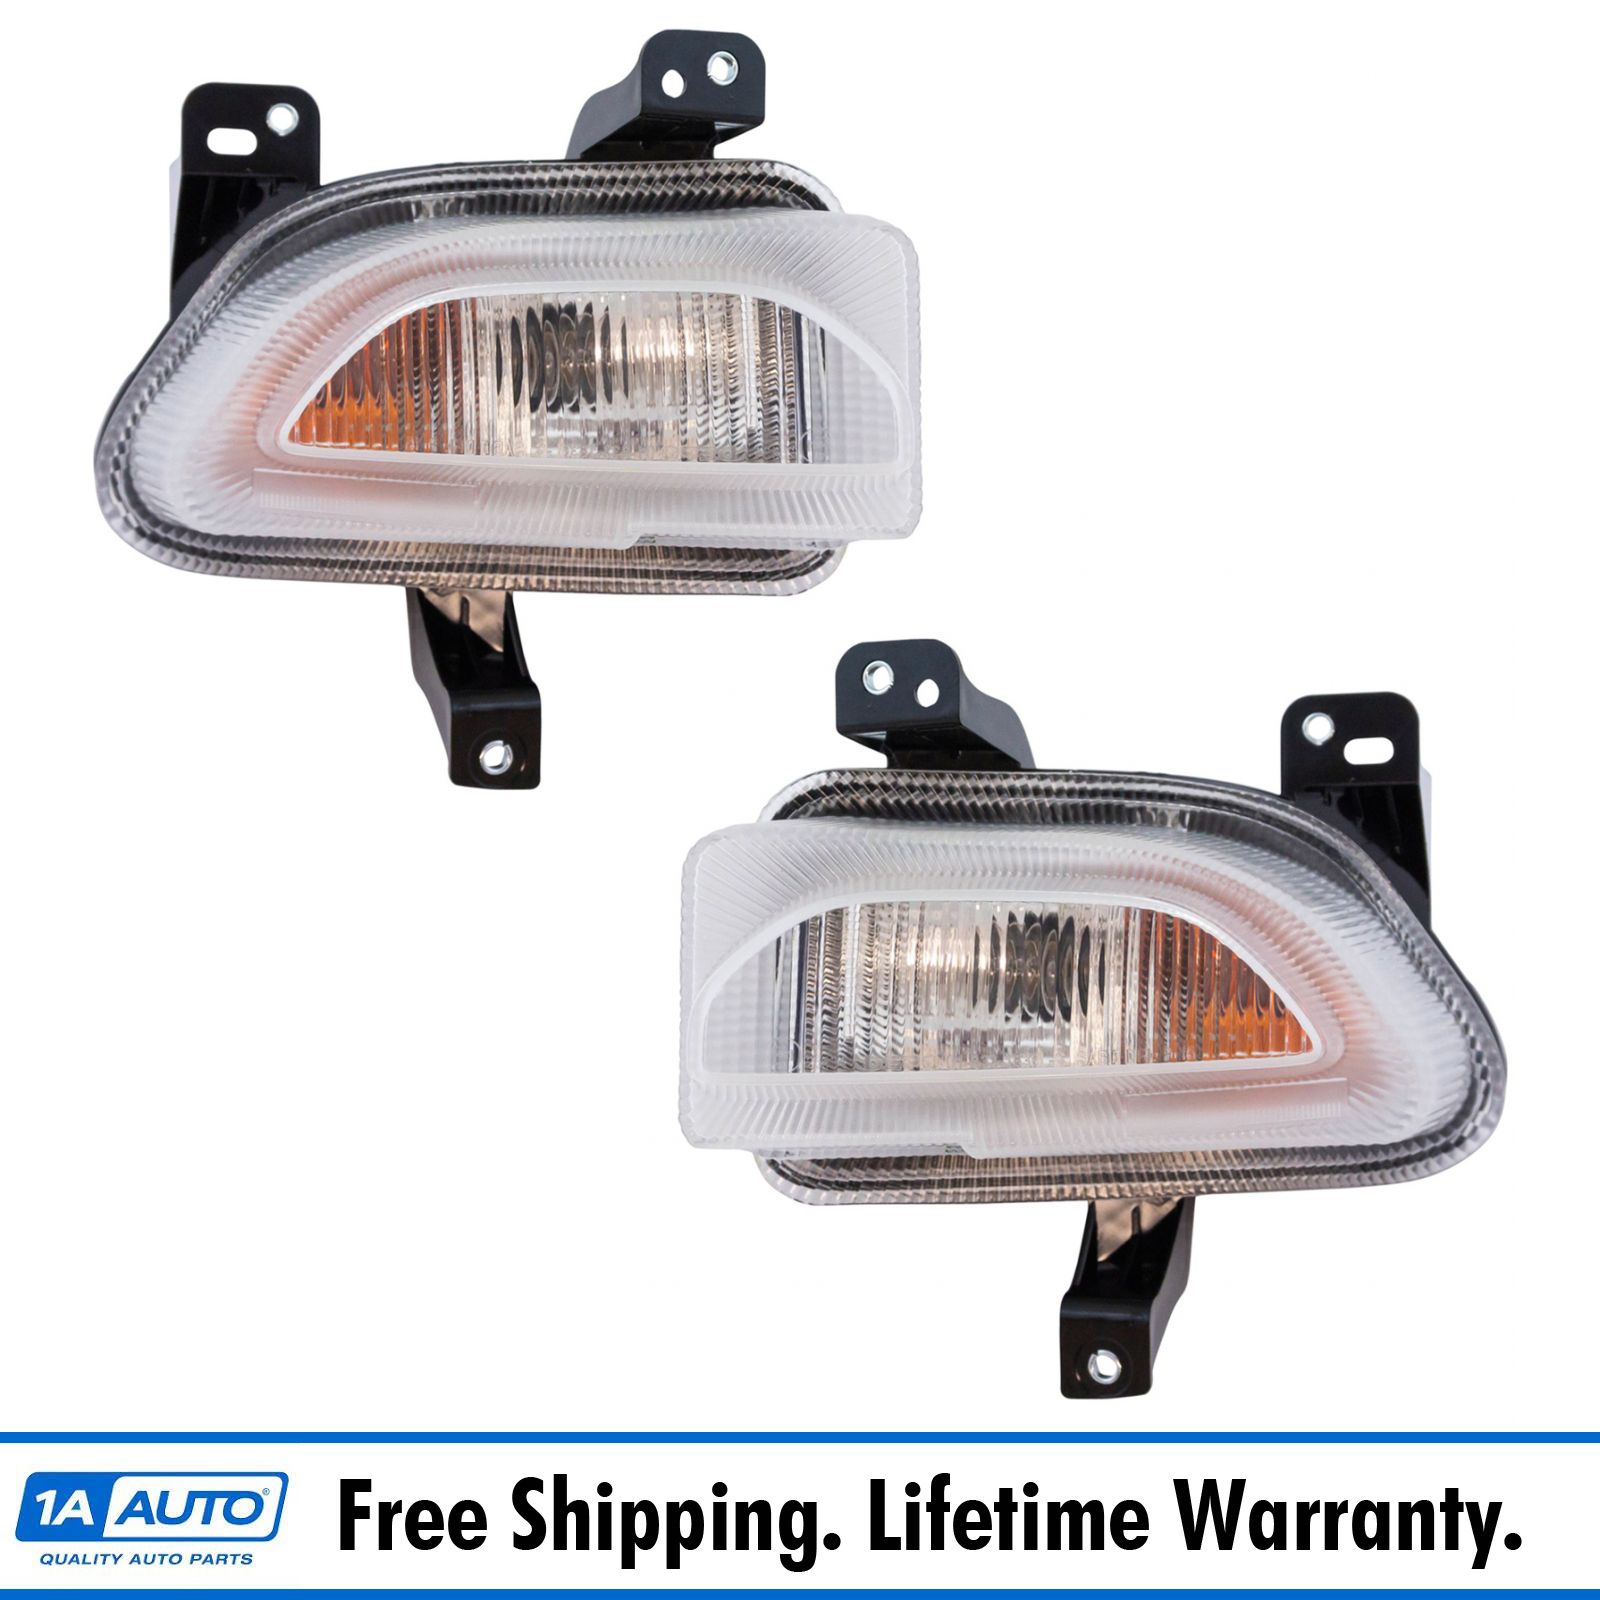 Fits 2015 2016 2017 2018 JEEP RENEGADE Front Signal/Corner Light Pair Driver and Passenger Side W/Bulbs DOT Certified Replaces CH2530105 CH2531105 CarLights360 